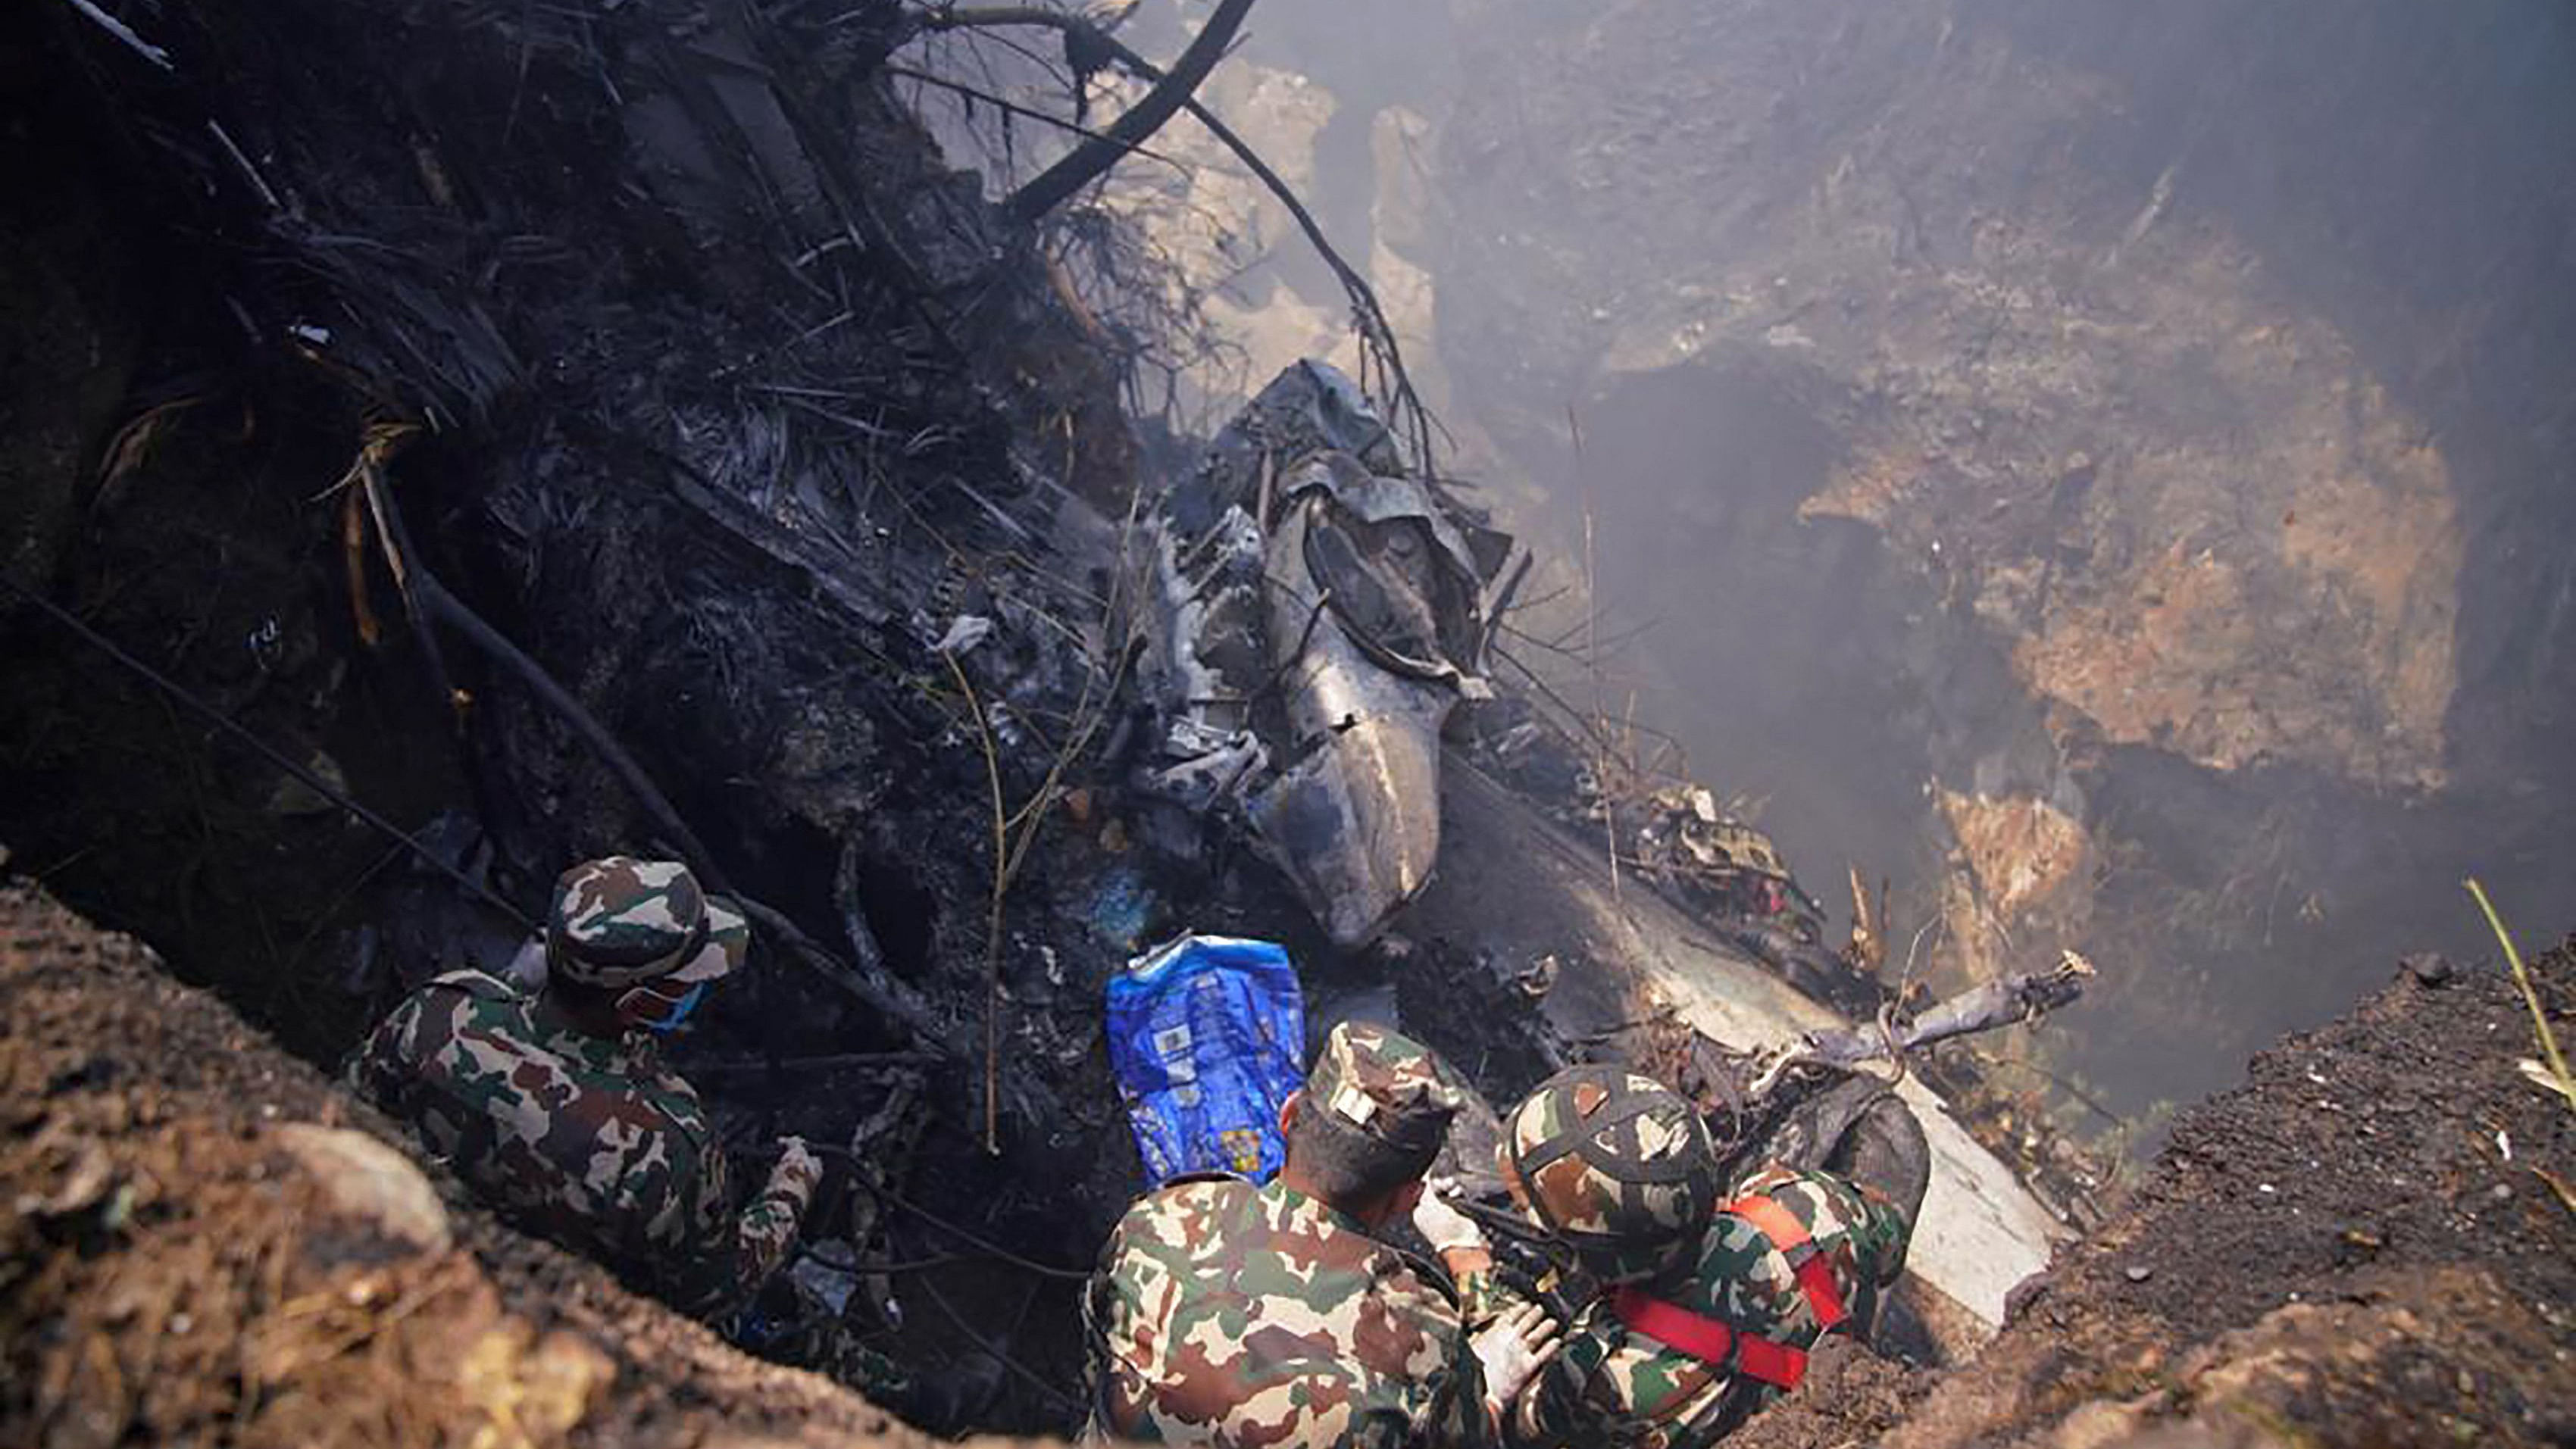 Rescuers inspect the site of a plane crash in Pokhara. Credit: AFP Photo